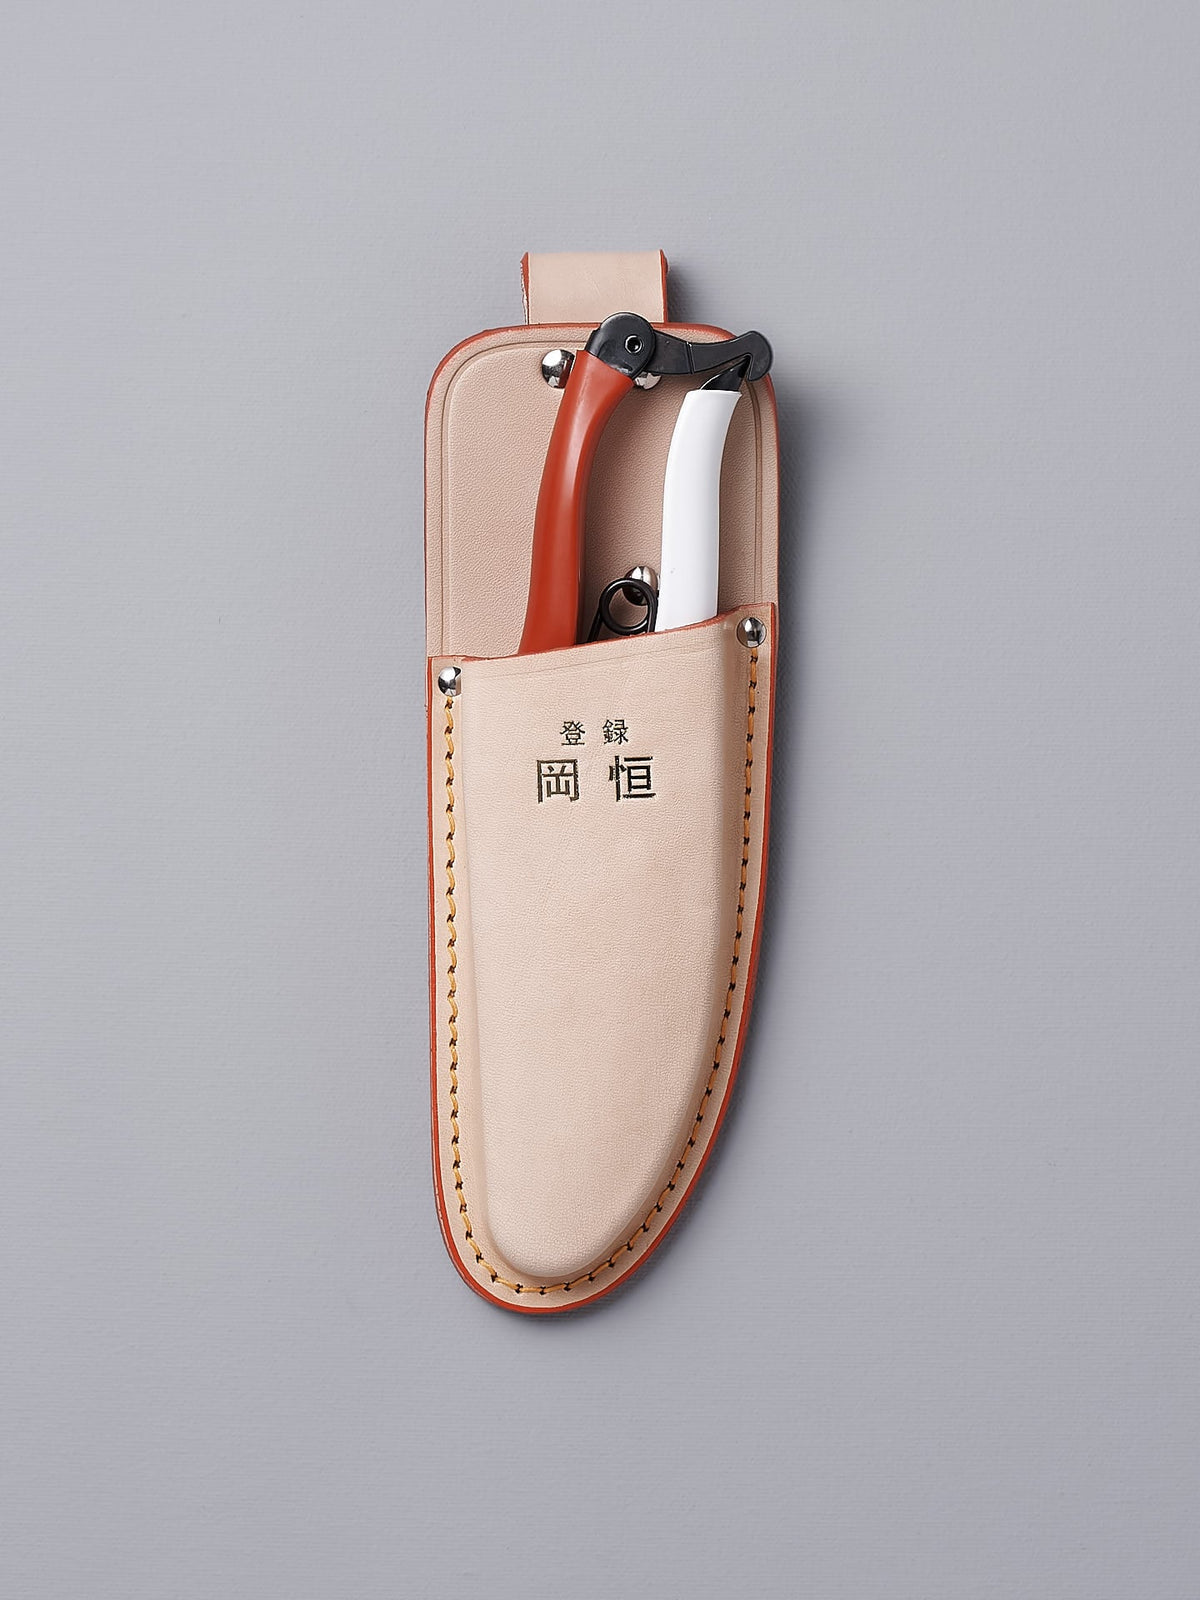 A Single Leather Holster with a pair of scissors in it from Okatsune.